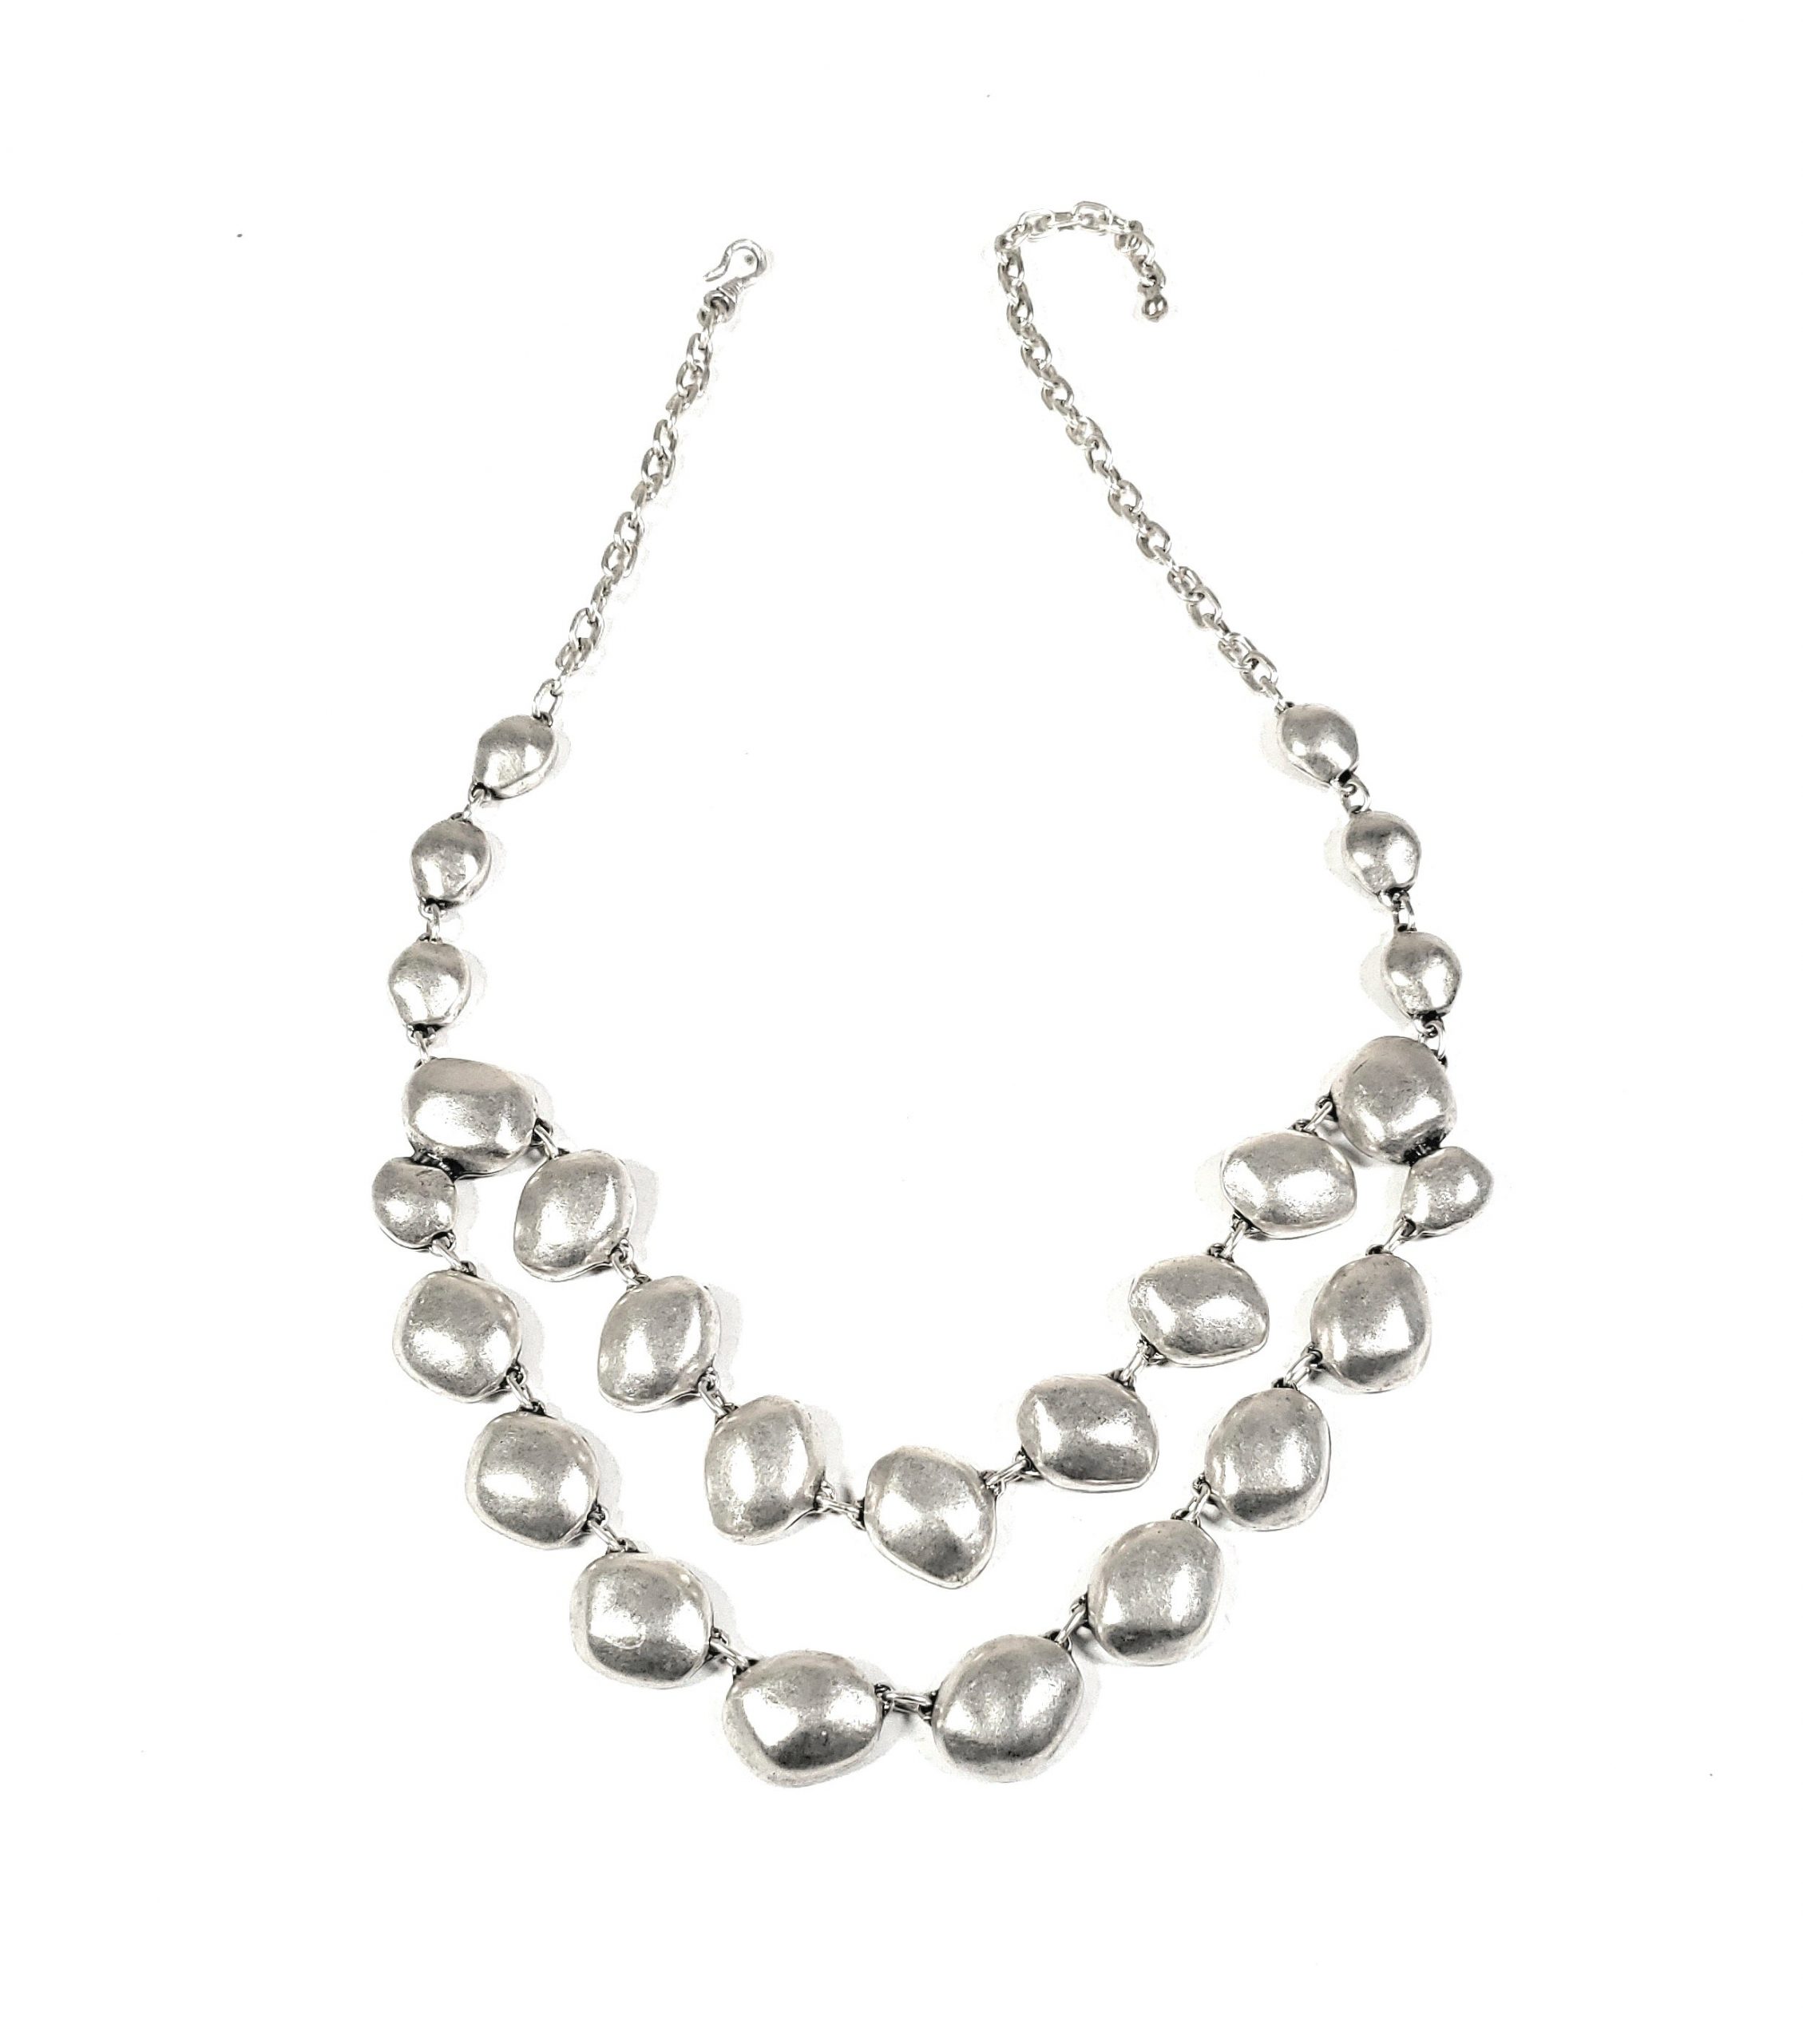 Hand Made Pewter Necklace Plated in 925 Silver - SKU# ZN-232